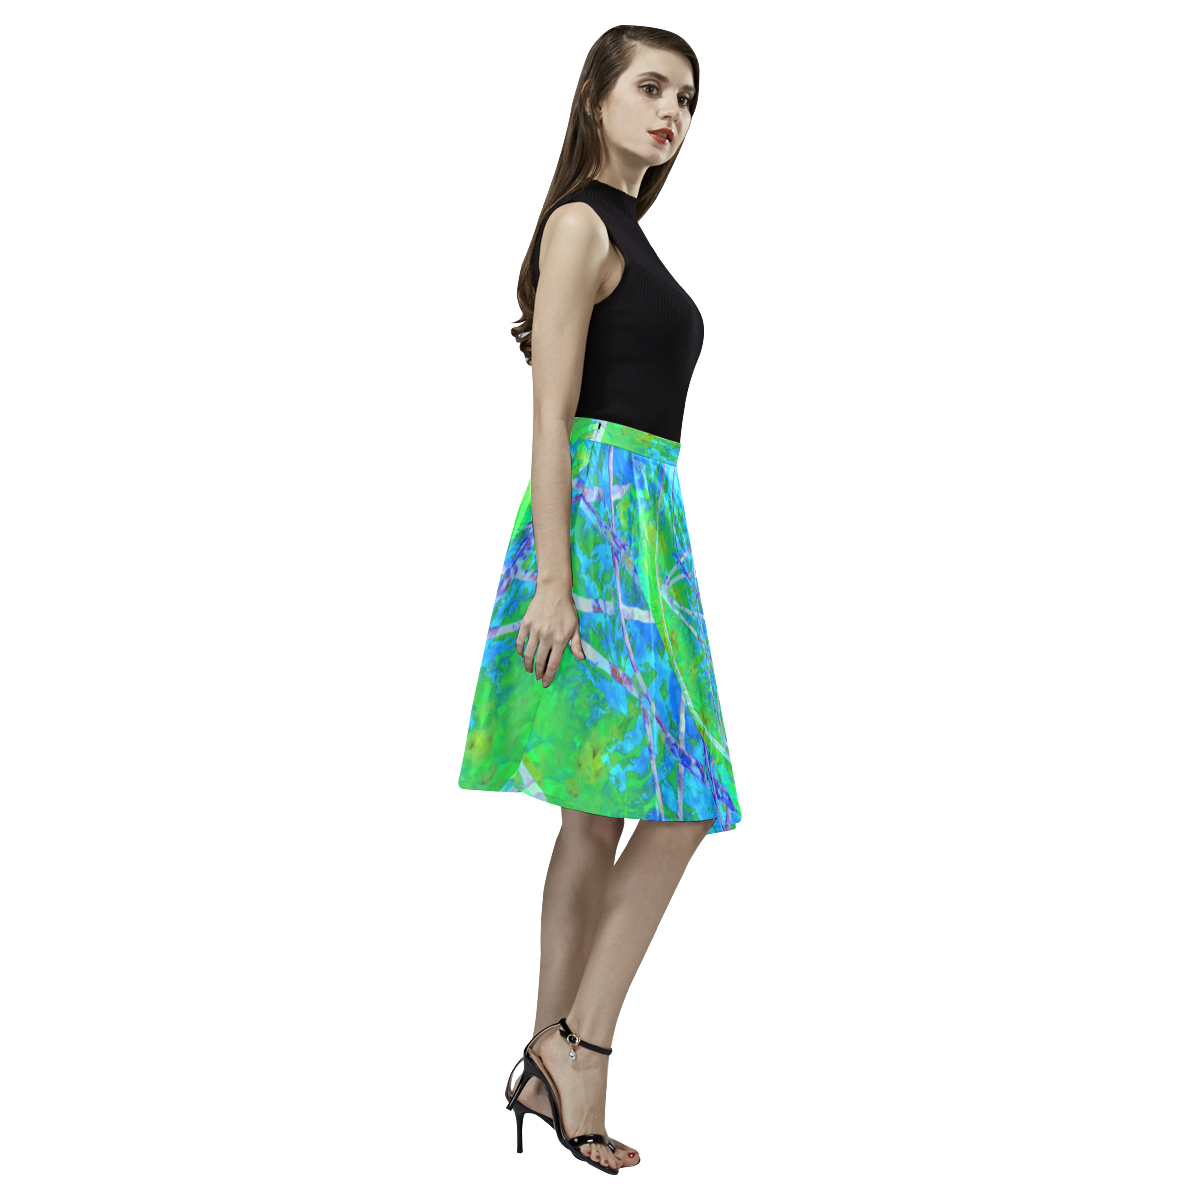 protection in nature colors-teal, blue and green Melete Pleated Midi Skirt (Model D15)